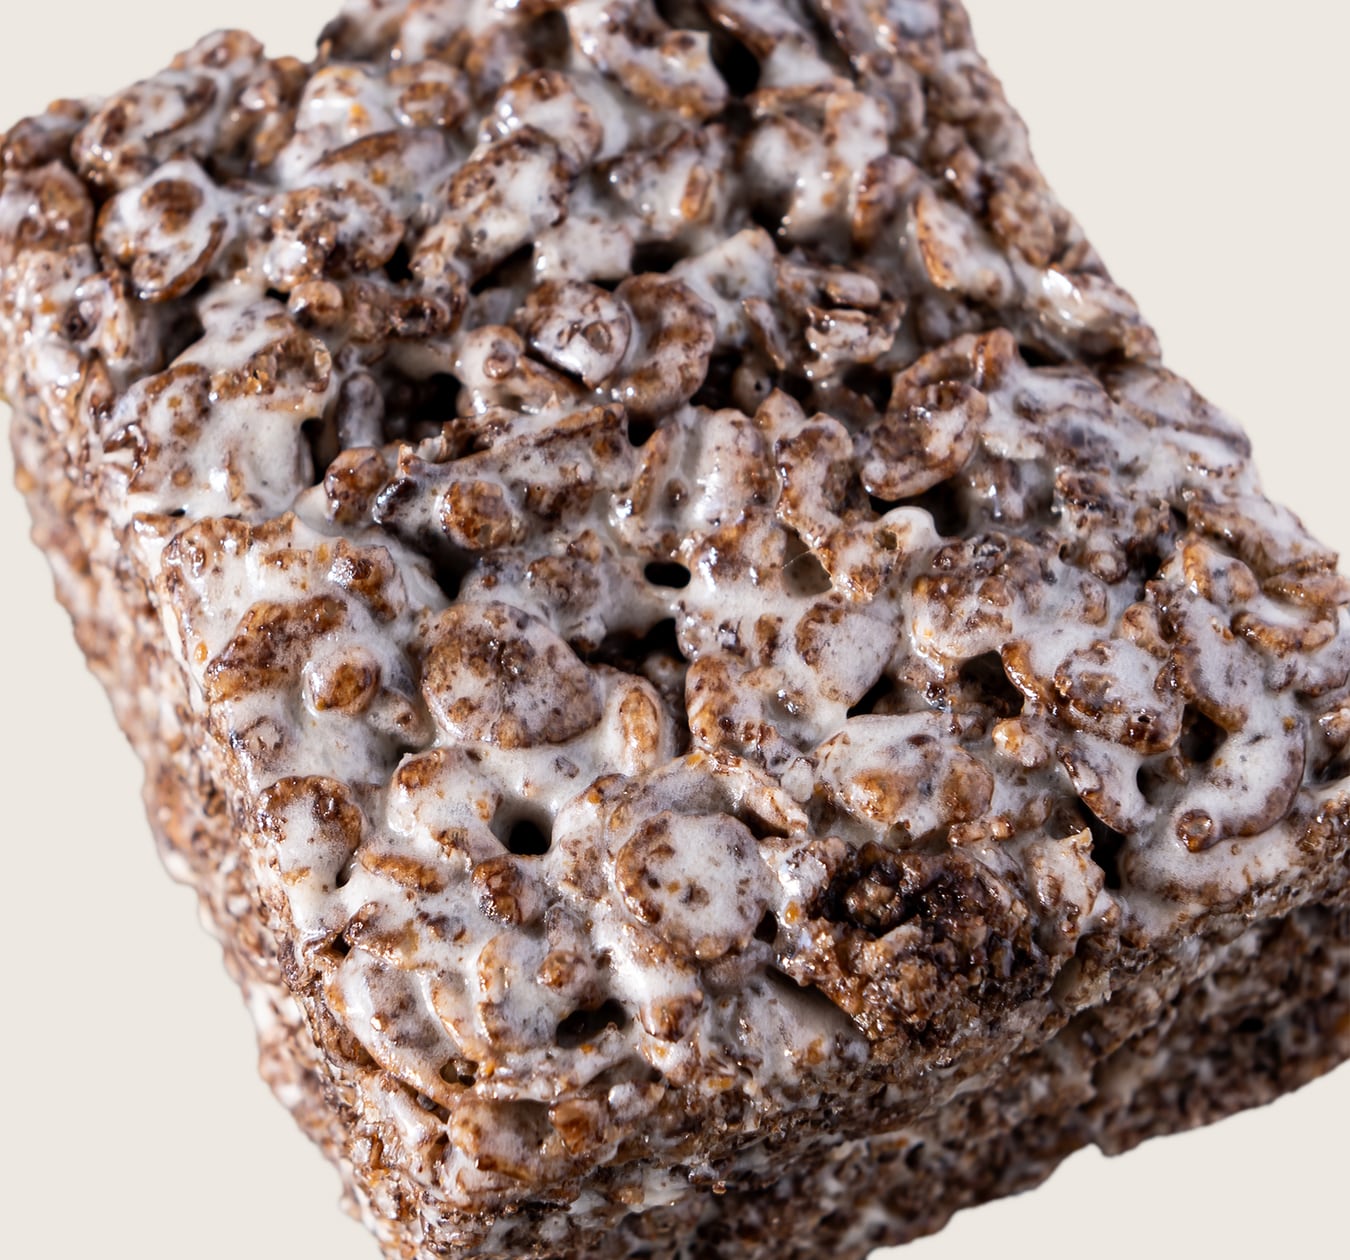 Coco puffs cereal bar 2